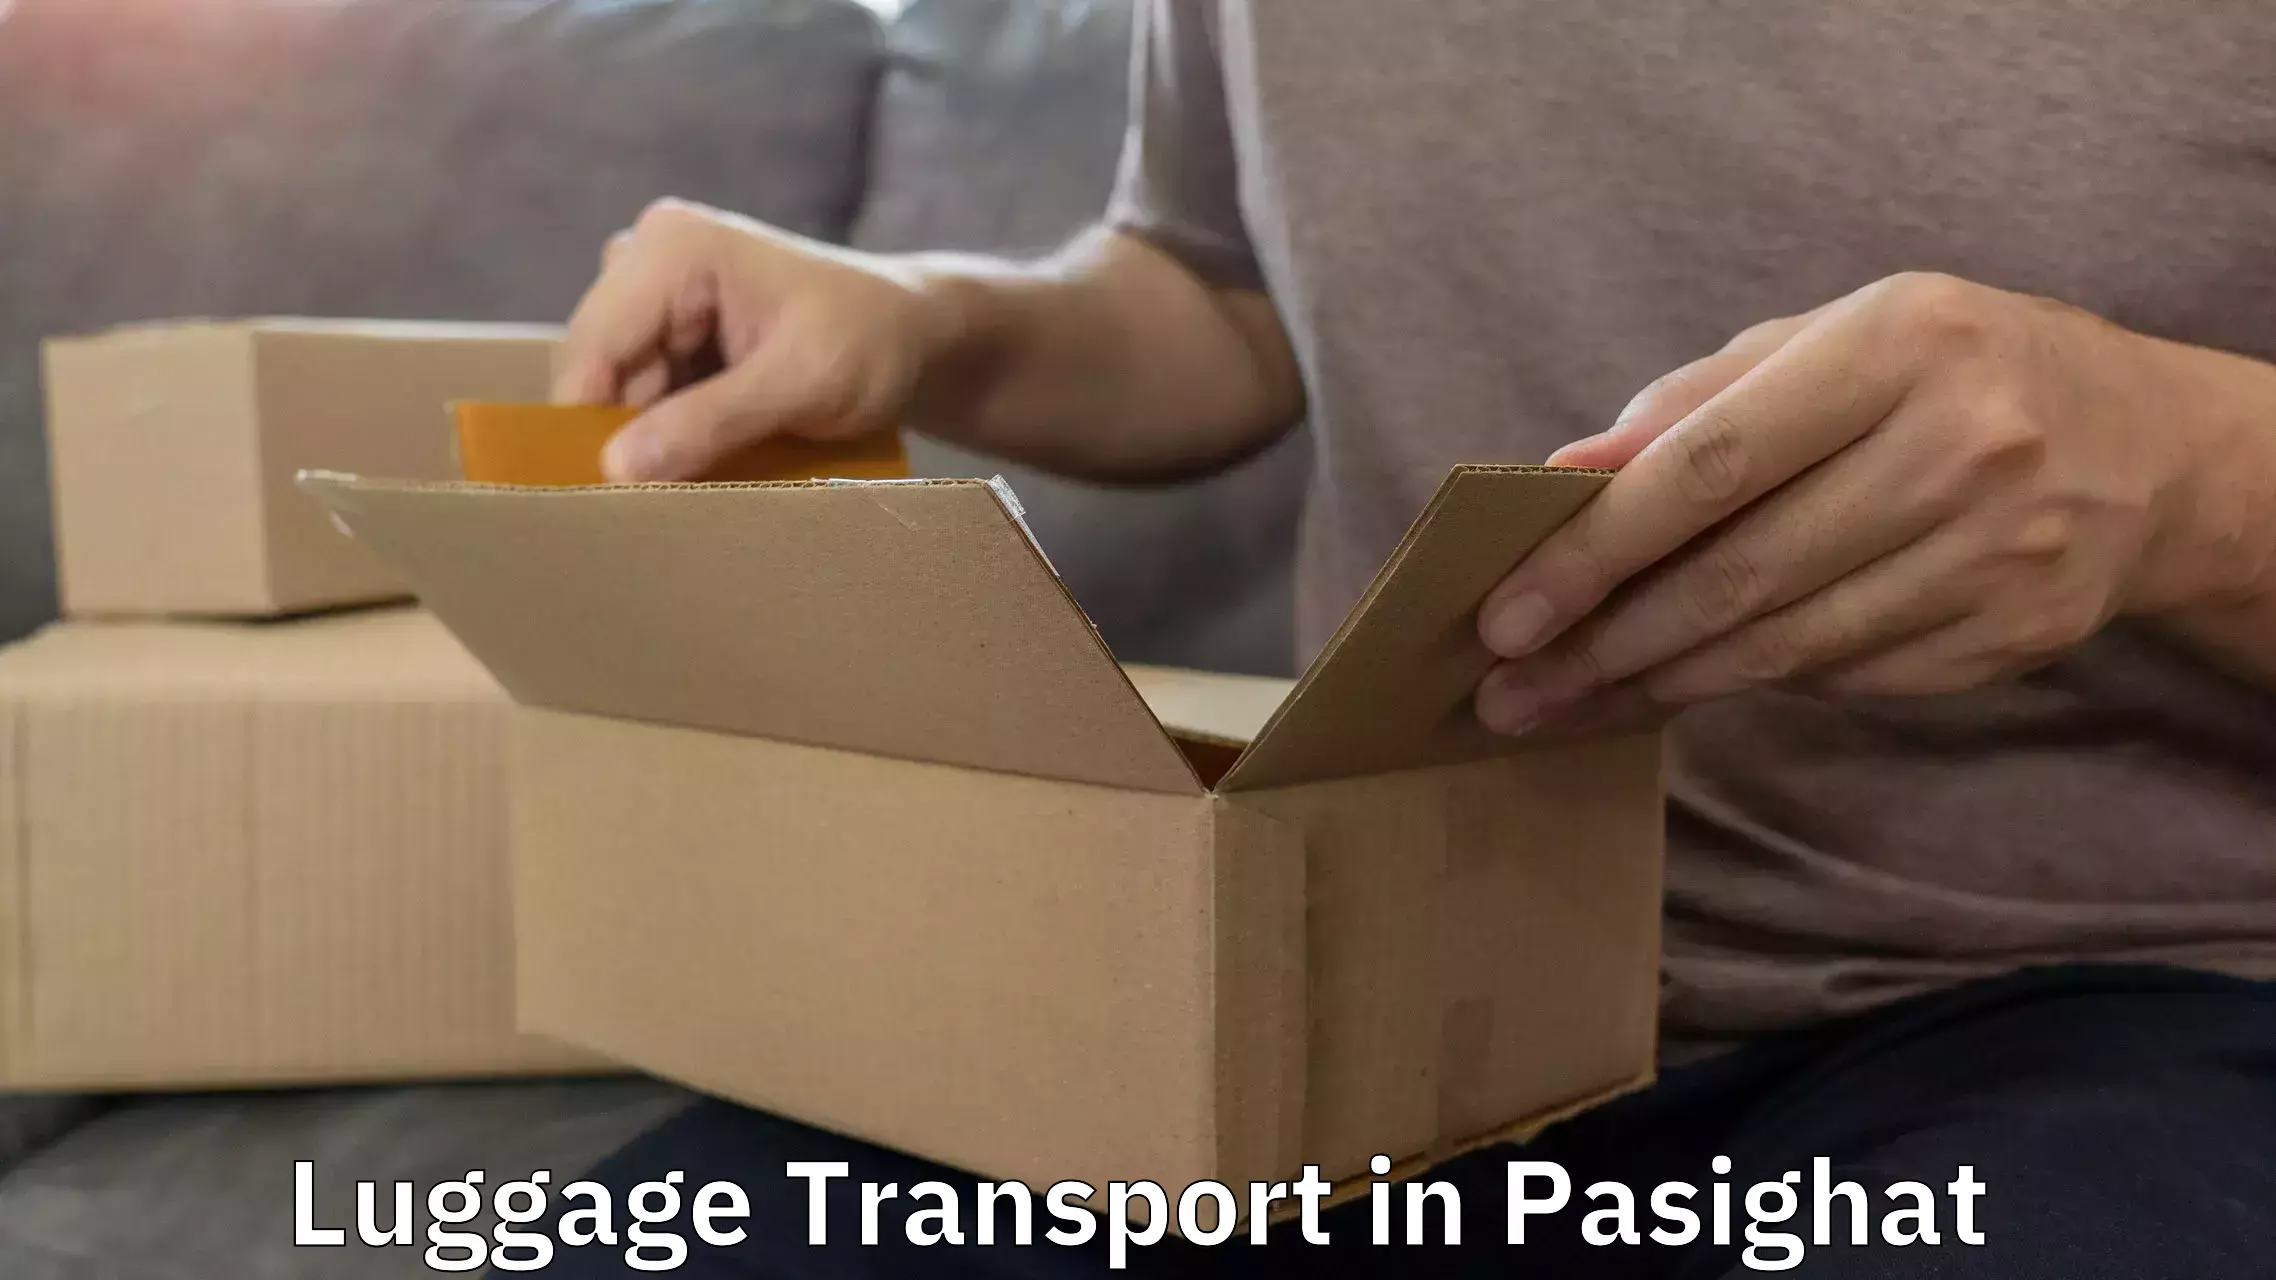 Luggage transport consultancy in Pasighat